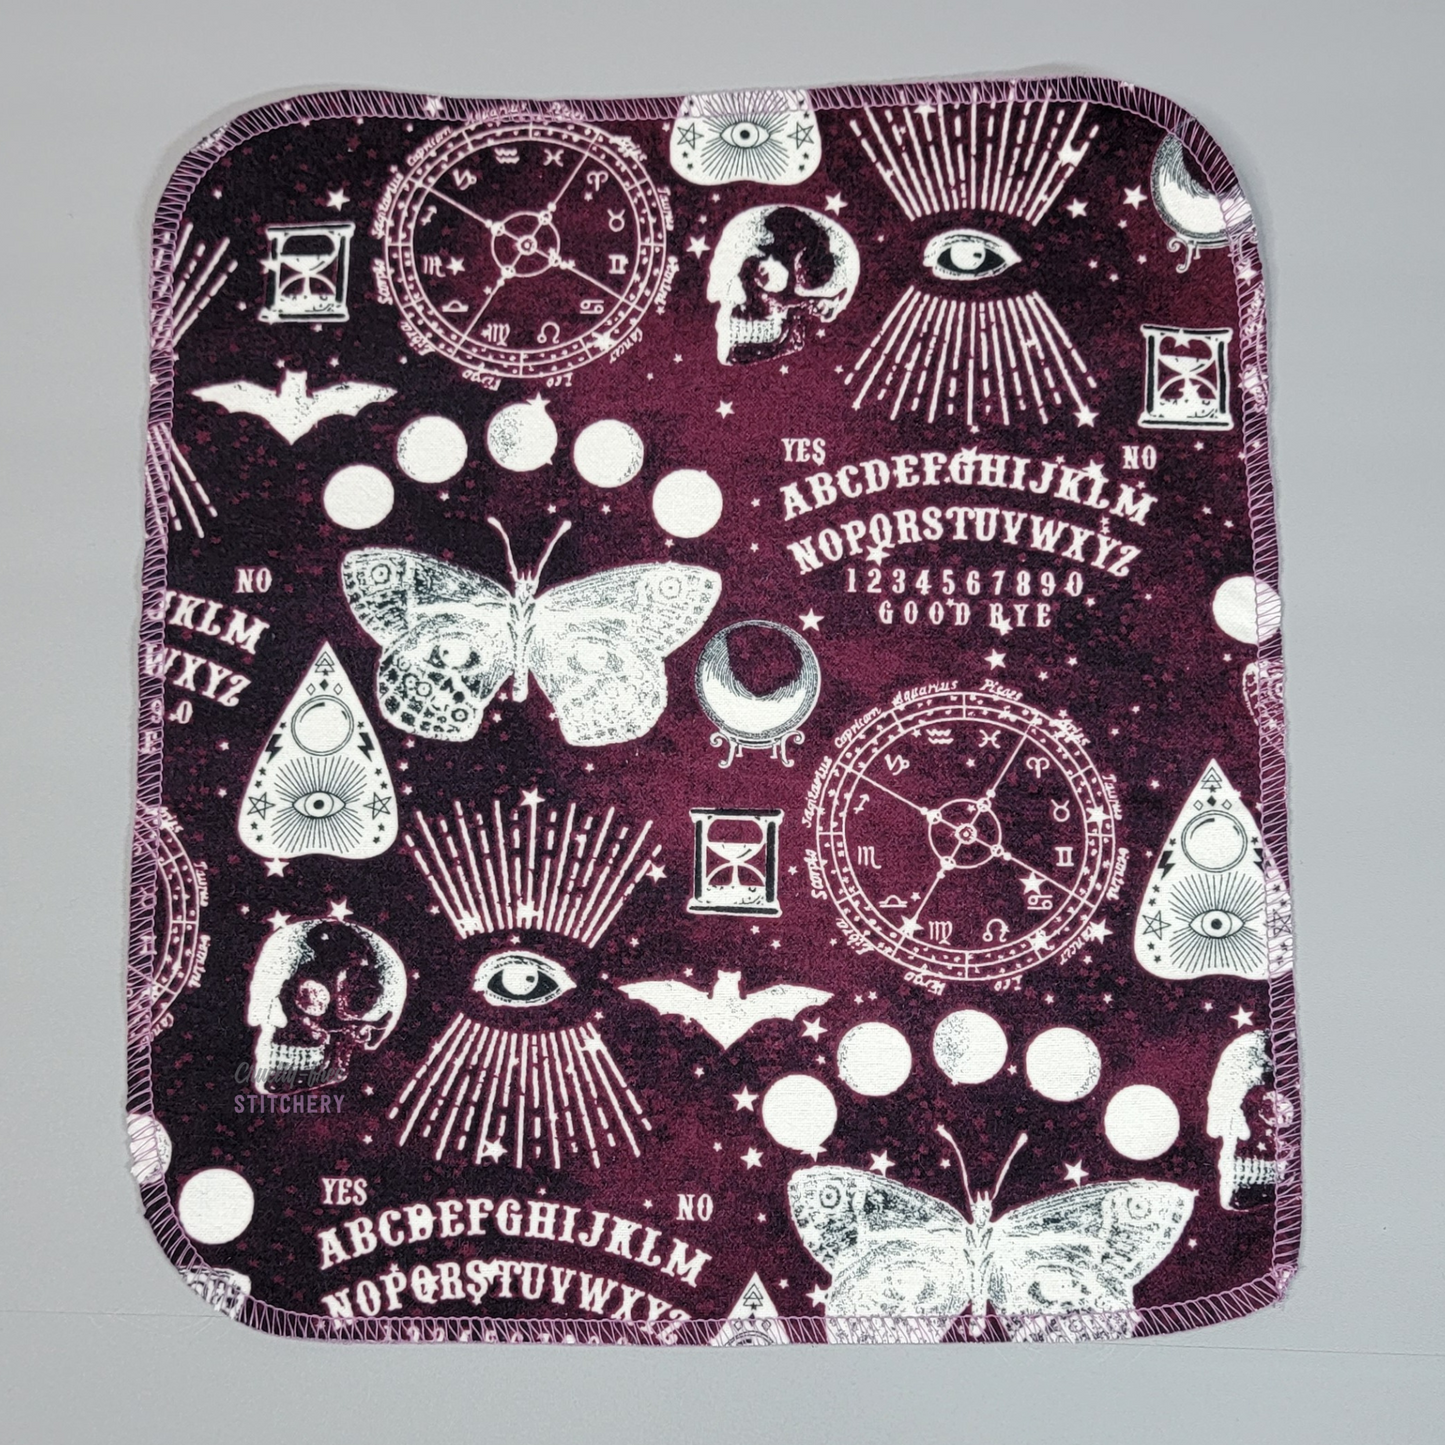 A NonPaper Towel in the Ouija print - a galaxy background with various shades of light and dark burgundy, with white printed motifs like ouija boards, planchettes, moths, skulls, bats, astrological charts, crystal balls, etc.